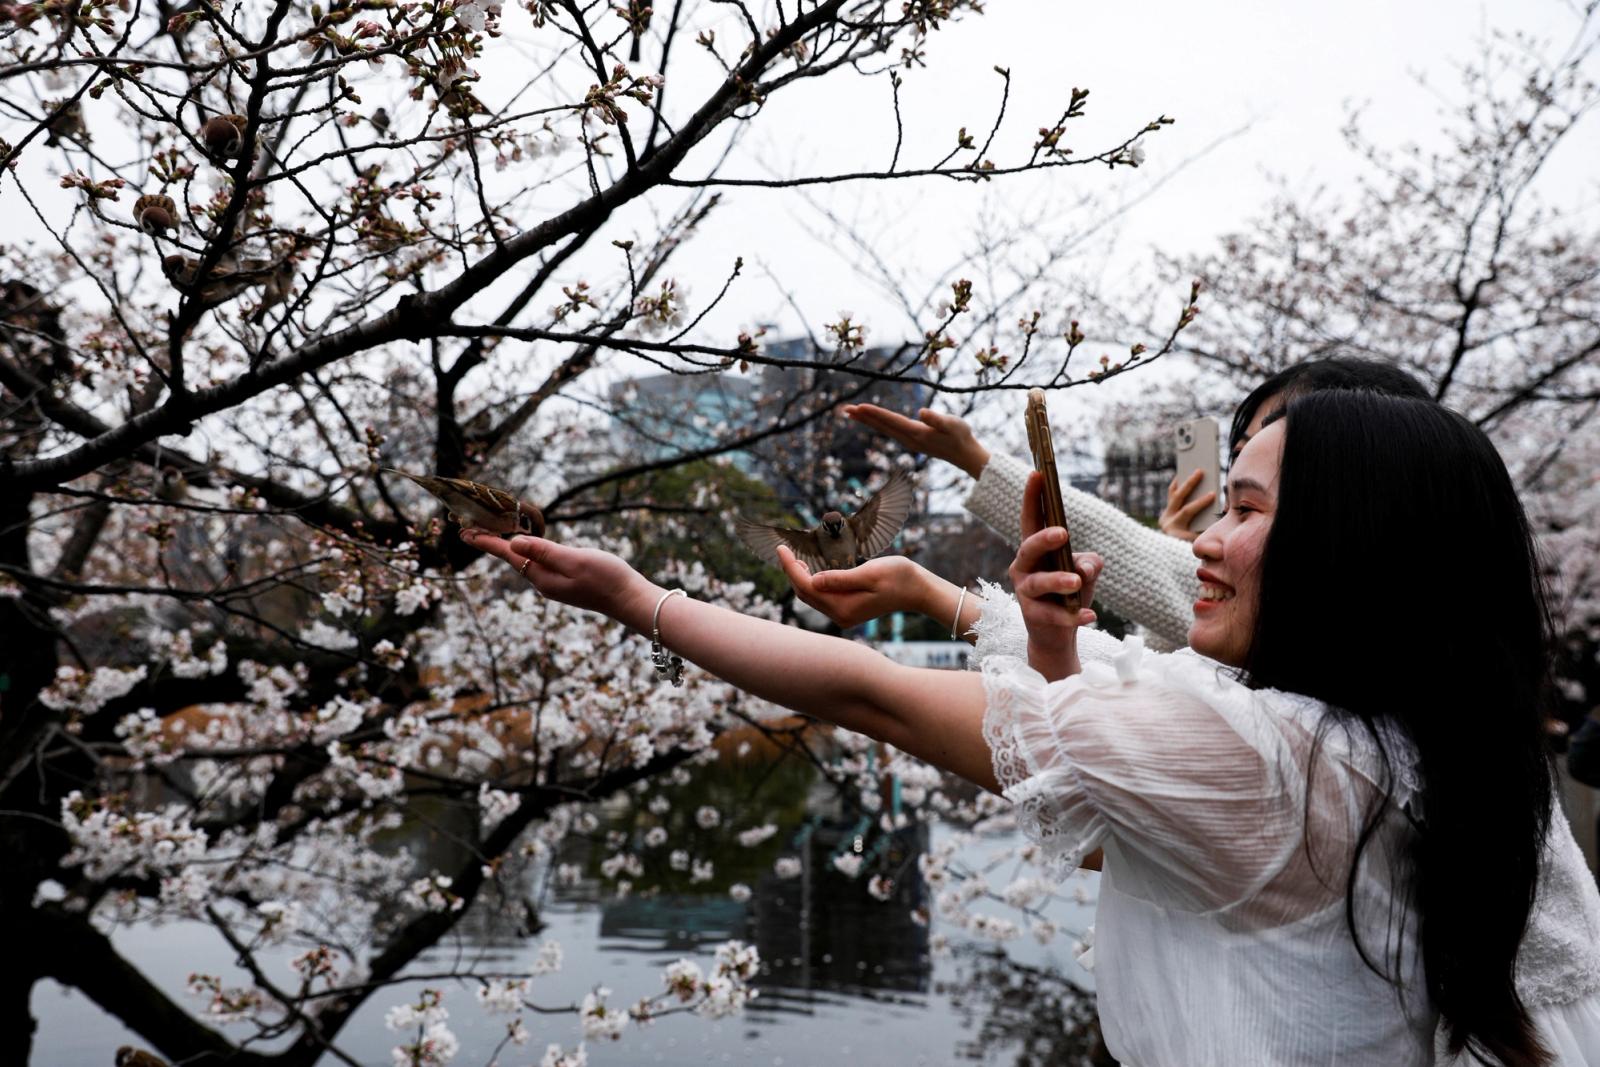 Girls feed sparrows and take photos in front of cherry blossom trees at Ueno park, in Tokyo, Japan, March 21, 2023. REUTERS/Androniki Christodoulou